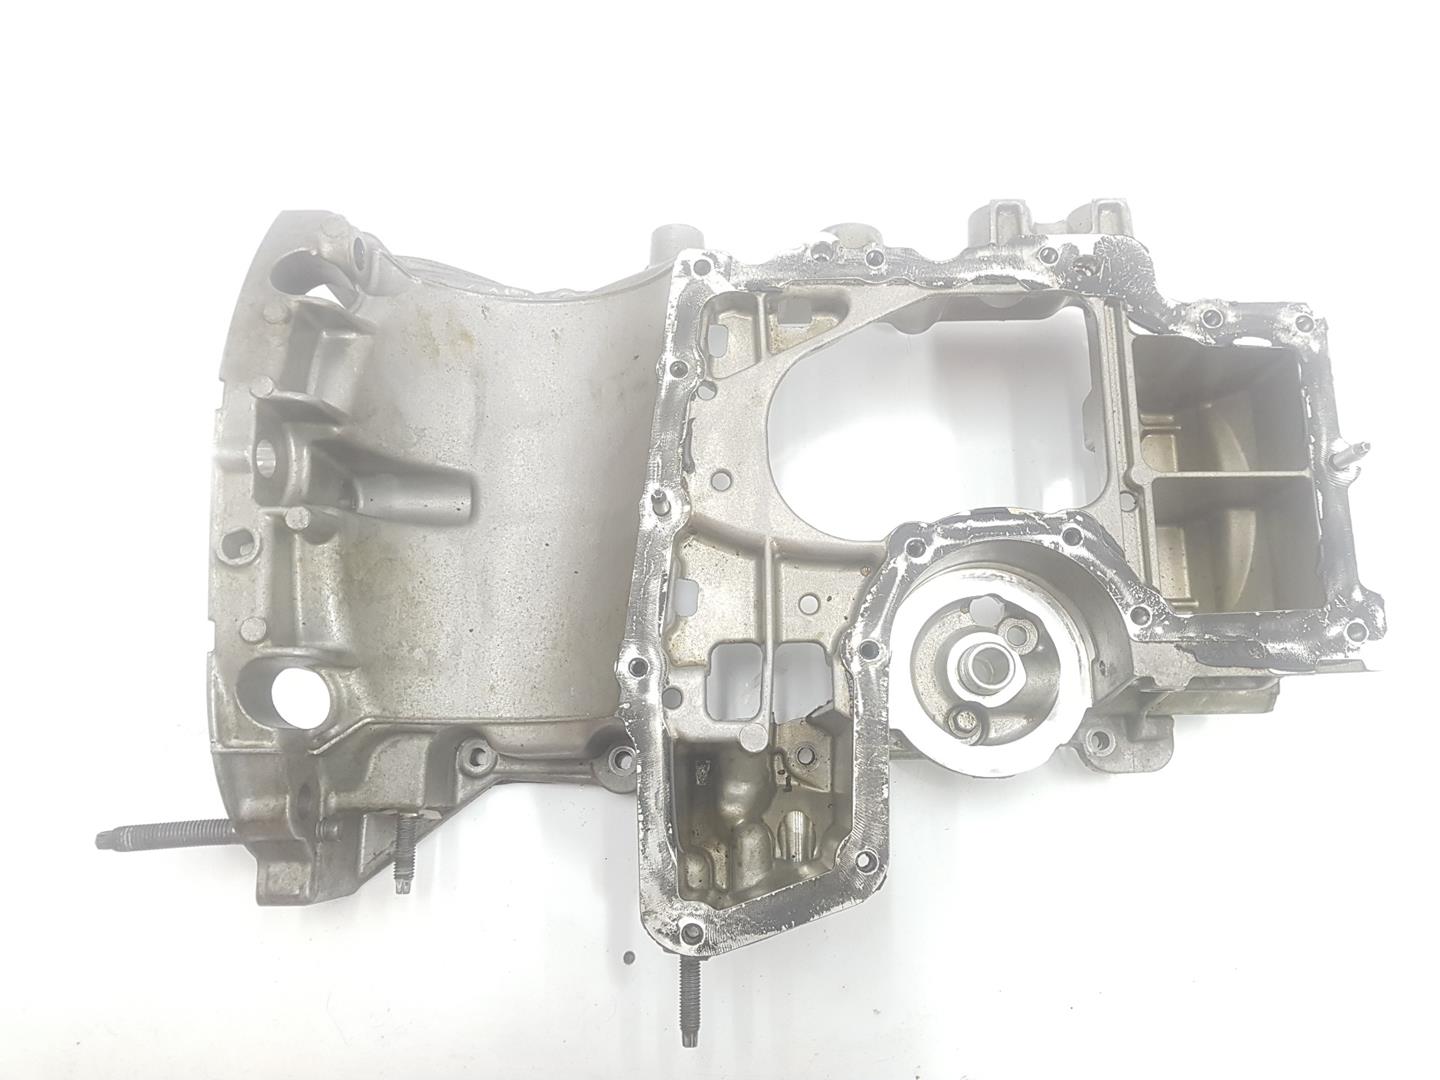 PEUGEOT 208 2 generation (2019-2023) Other Engine Compartment Parts 9827467380, 9827467380 24206228